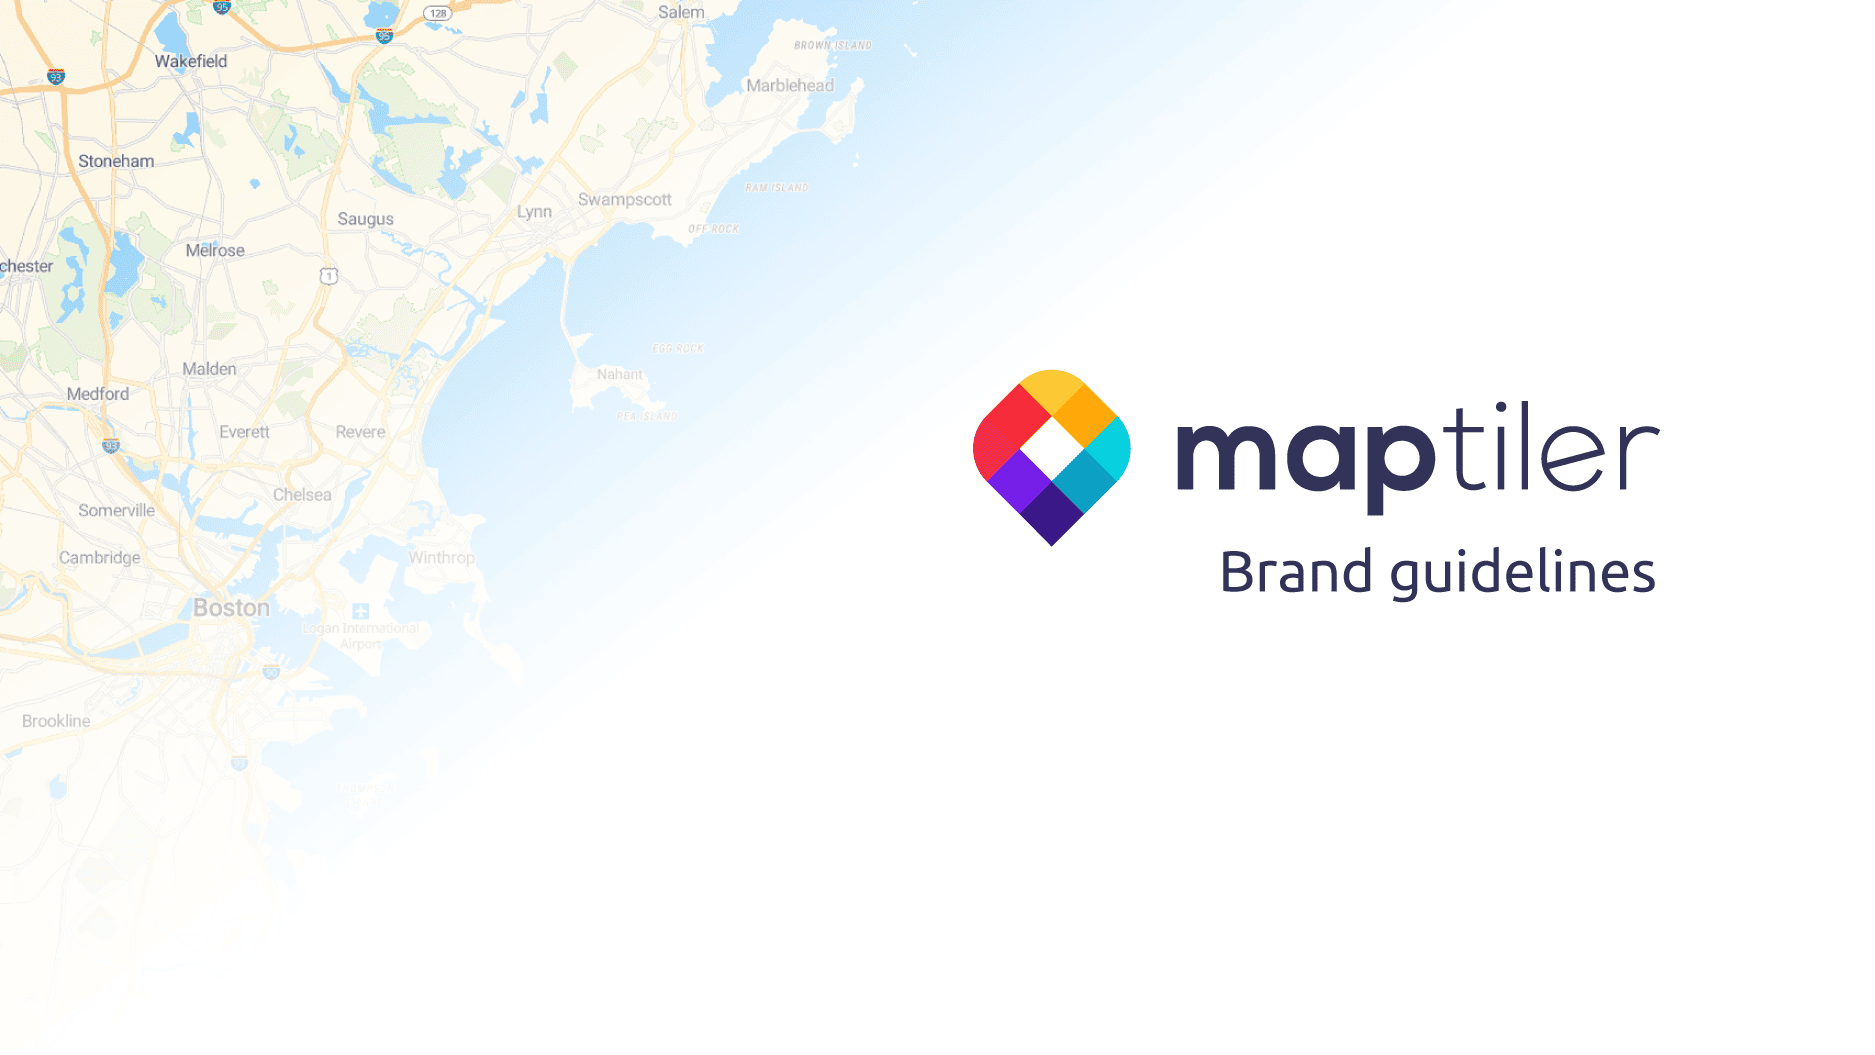 2018-08-07-the-new-visual-identity-of-maptiler-5.png